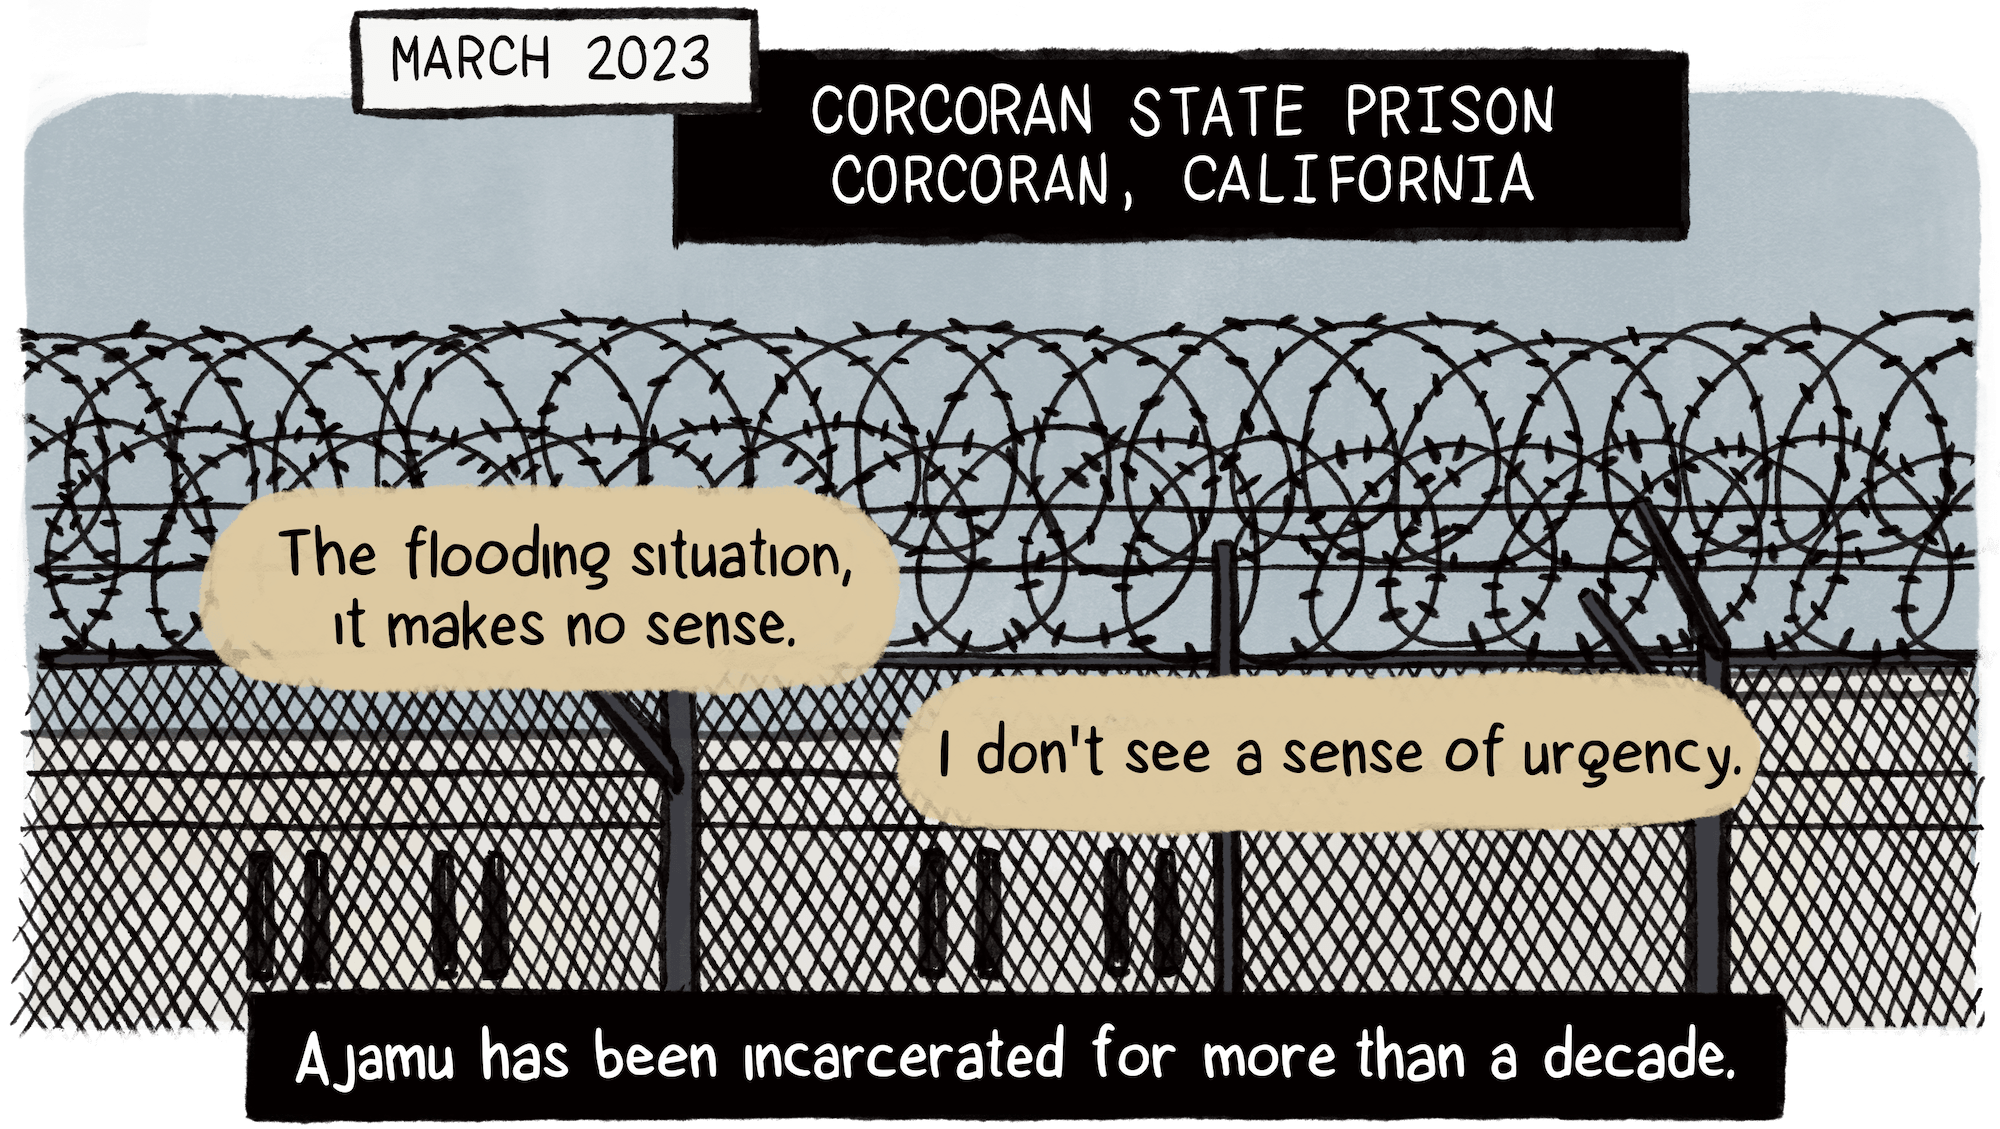 Alt text: A fence with razor wire stands outside Corcoran State Prison in California in March 2023, and an unseen incarcerated man named Ajamu, who has been behind bars for over a decade, says: “The flooding situation, it makes no sense. I don't see a sense of urgency.”